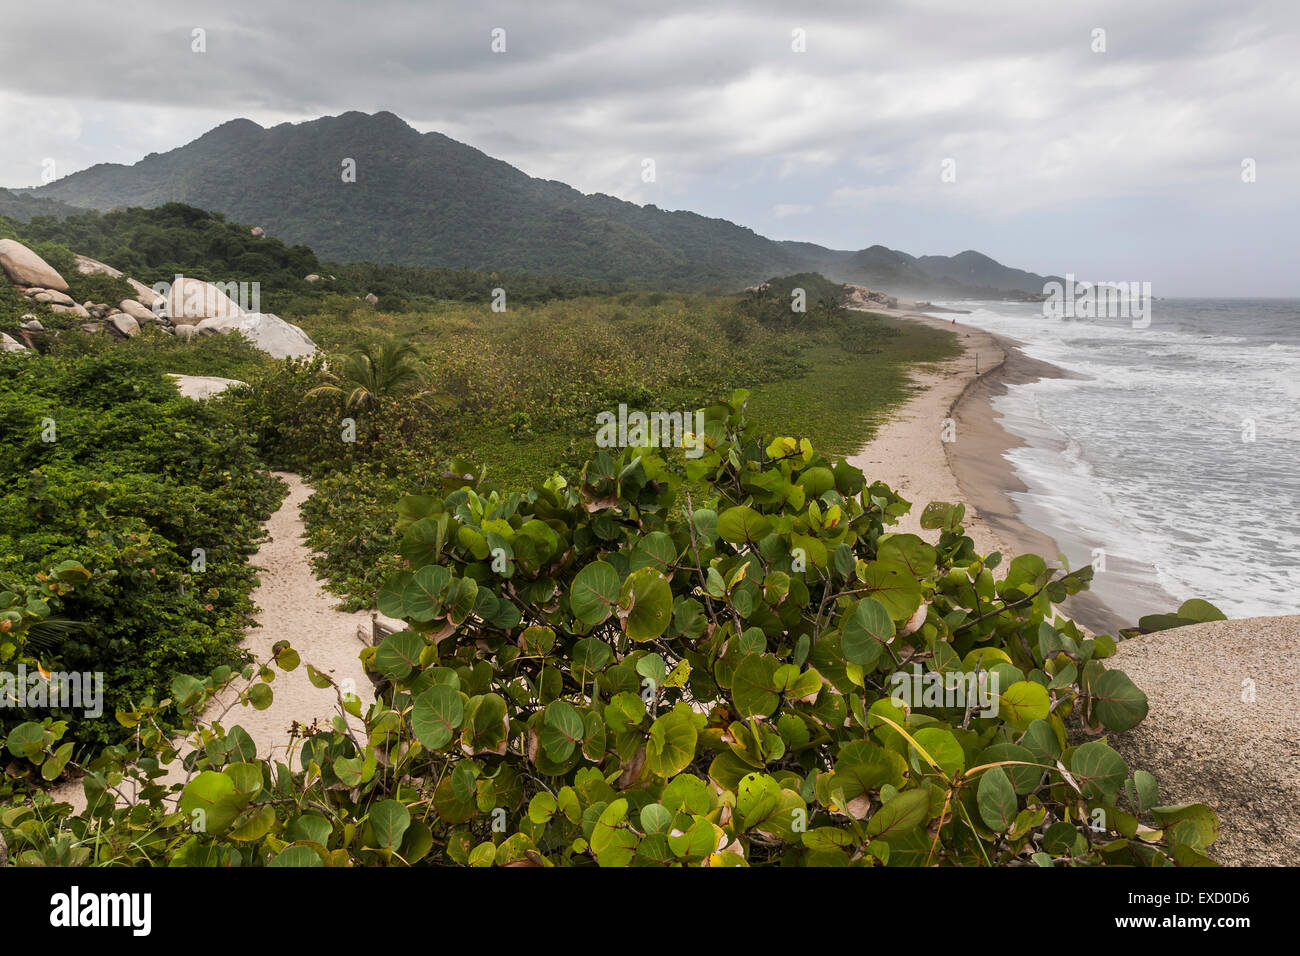 Trail along the coast in Tayrona National Park near Santa Marta, Colombia.  The park is one of the most popular tourist destinat Stock Photo